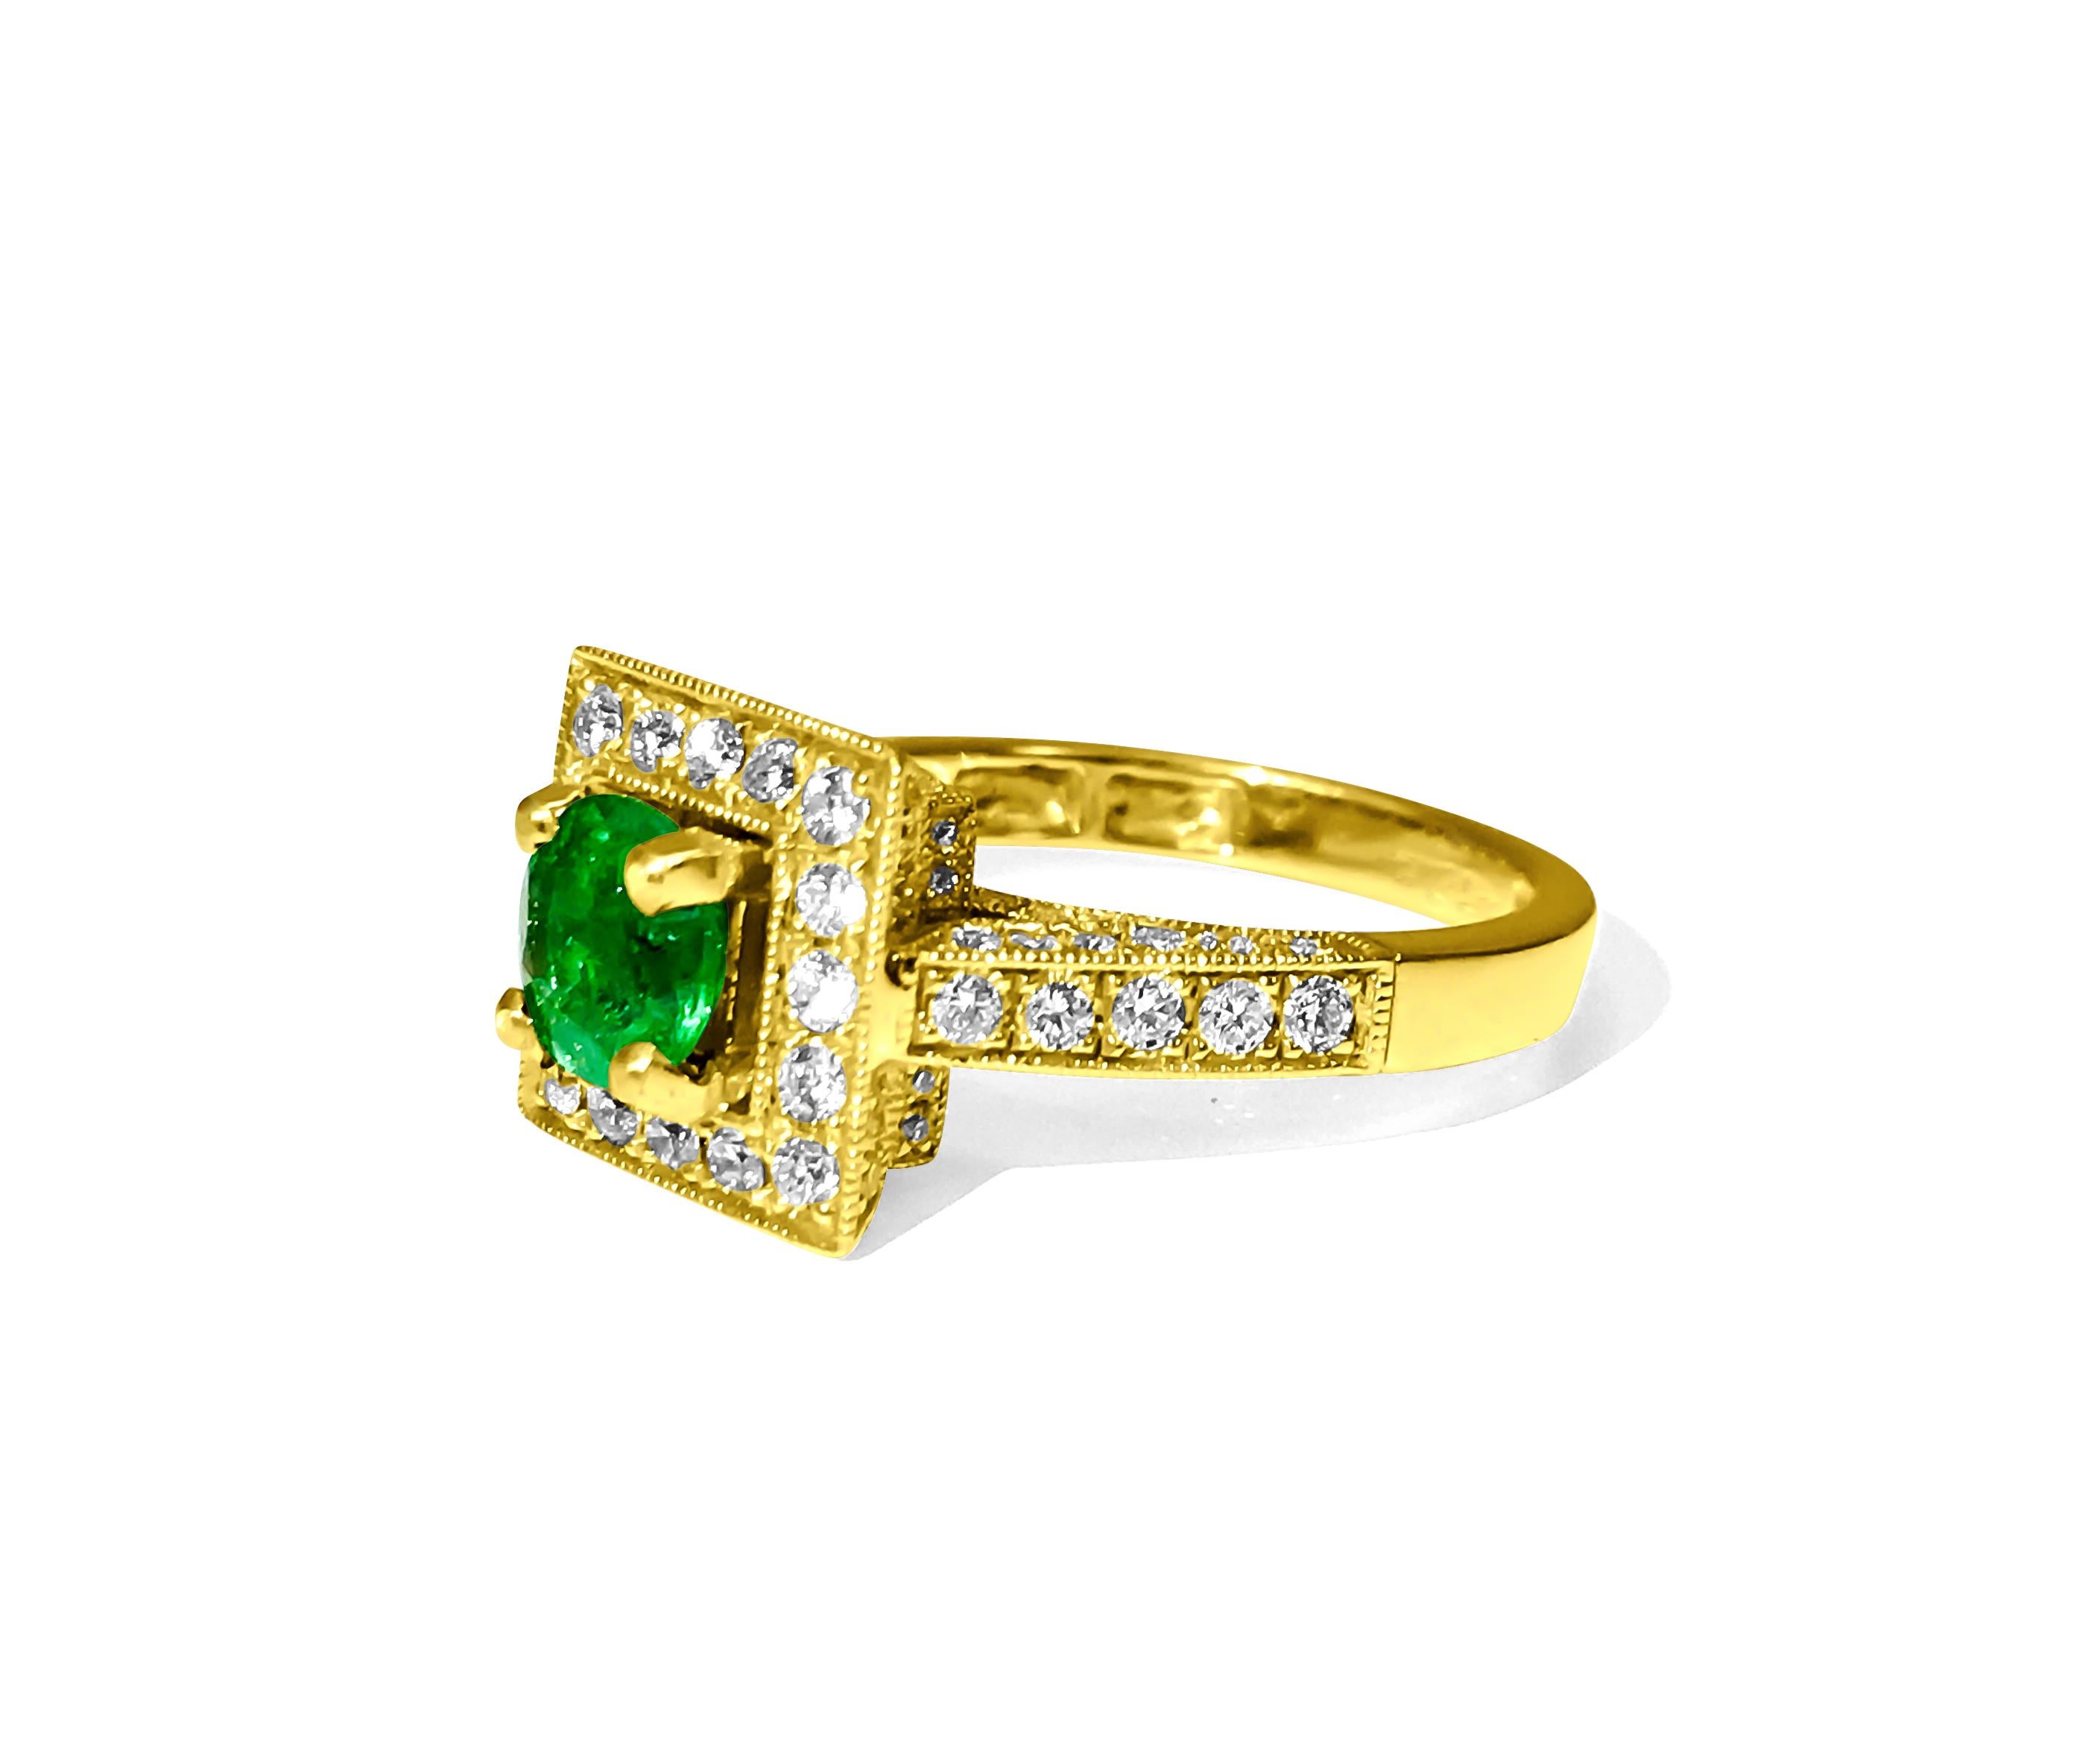 Metal: 18k yellow gold.  
1.50 carat round emerald set in prongs. 100% natural earth mined emerald. 

1.50 carat round brilliant cut diamonds. VS clarity and G color. 100% natural earth mined and genuine diamonds. Total carat weight of all precious